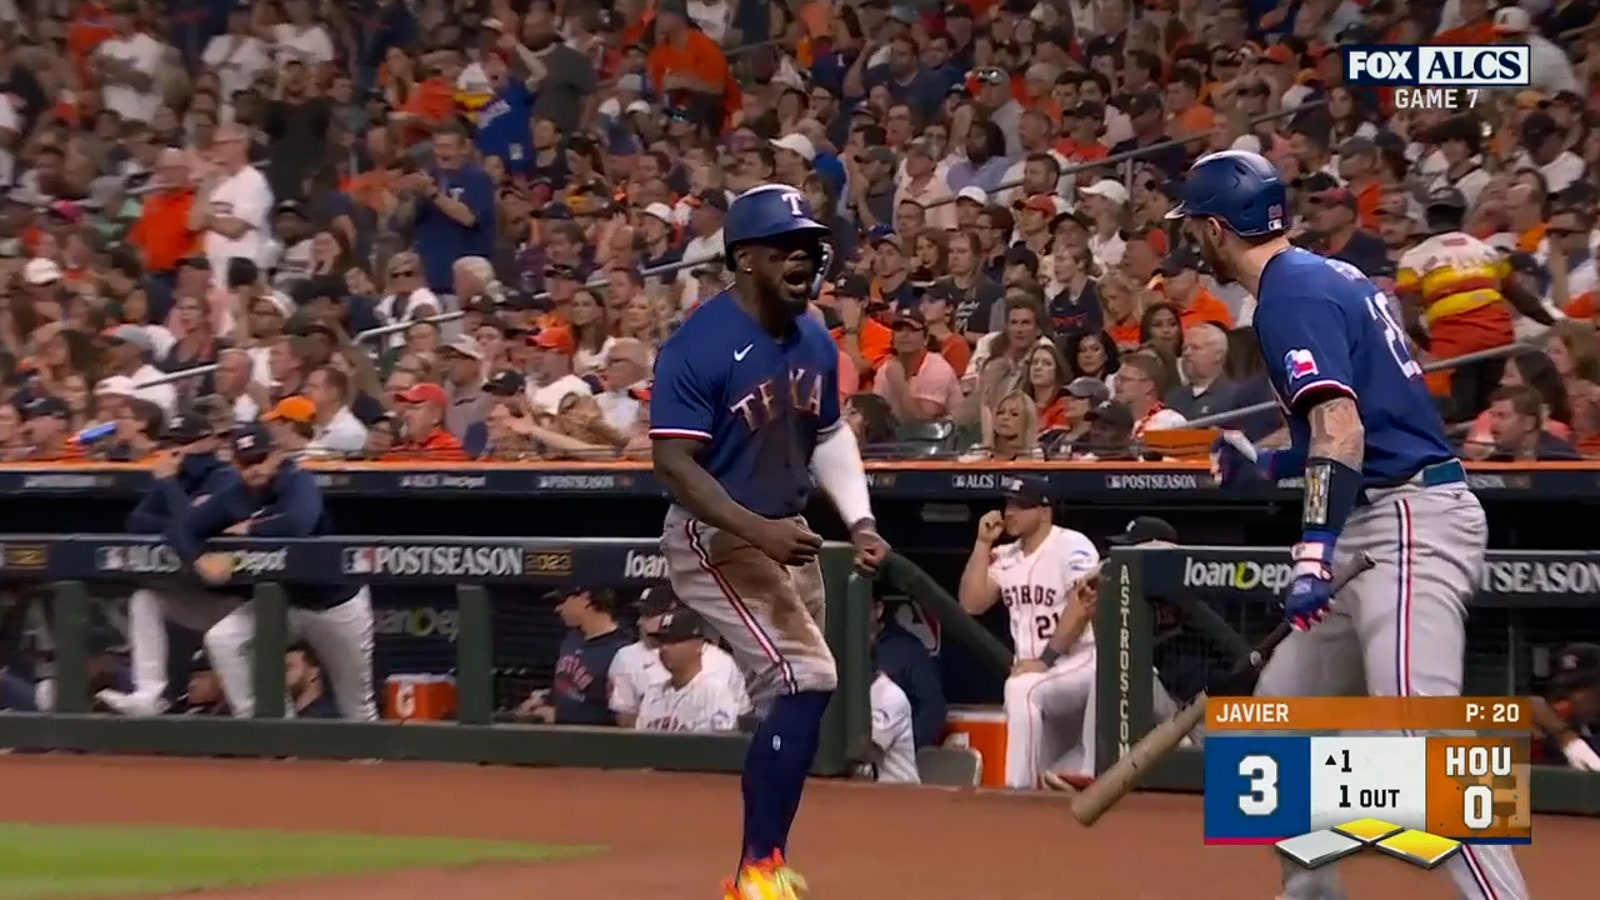 Rangers score three runs in first inning to take early lead over Astros